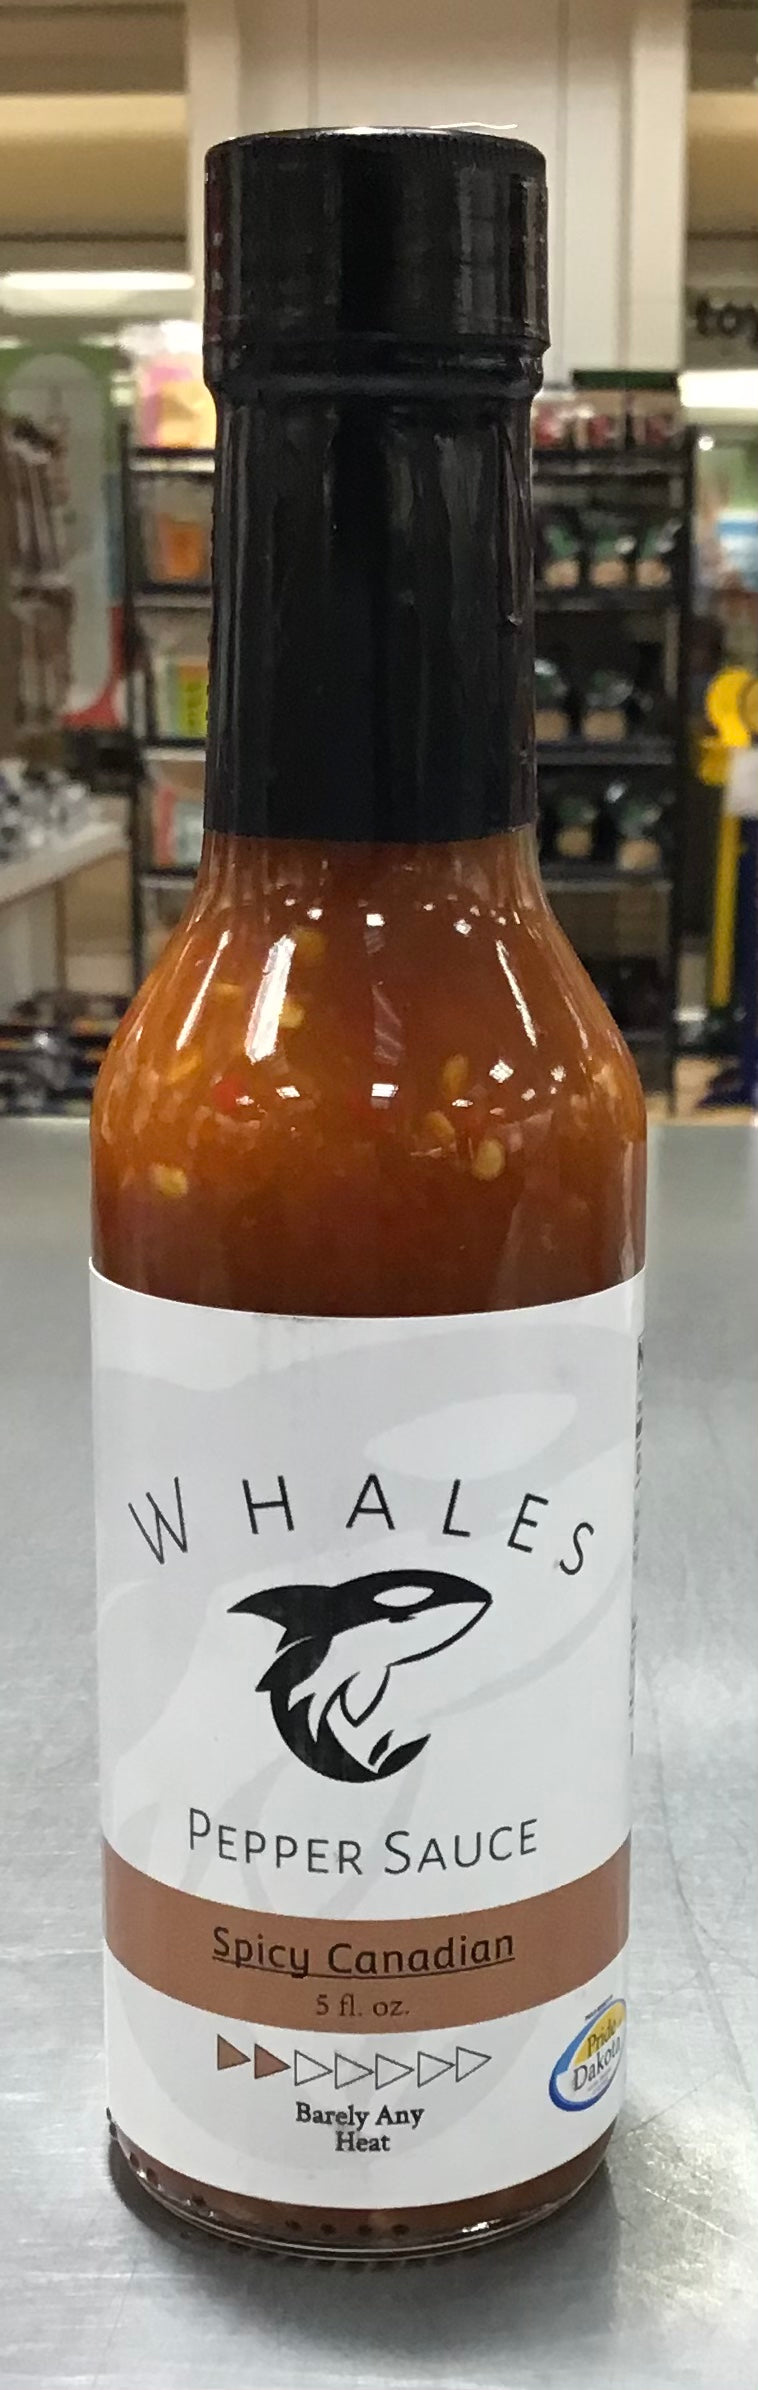 Whales Pepper Sauce Spicy Canadian 